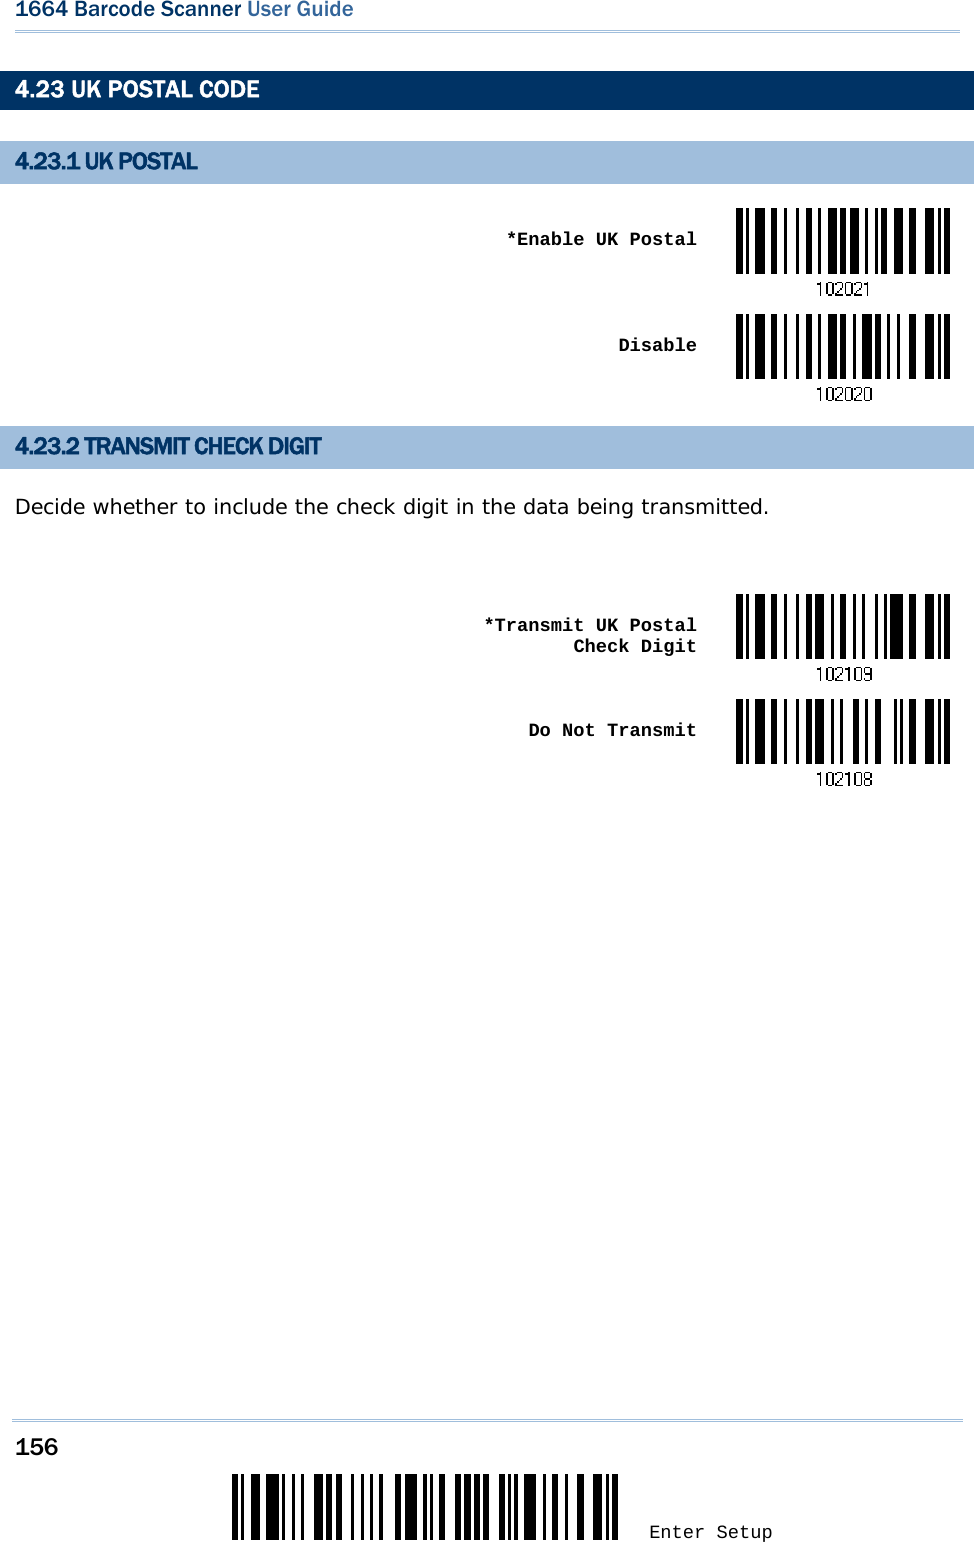 156 Enter Setup 1664 Barcode Scanner User Guide  4.23 UK POSTAL CODE 4.23.1 UK POSTAL  *Enable UK Postal Disable4.23.2 TRANSMIT CHECK DIGIT Decide whether to include the check digit in the data being transmitted.   *Transmit UK Postal Check Digit Do Not Transmit             